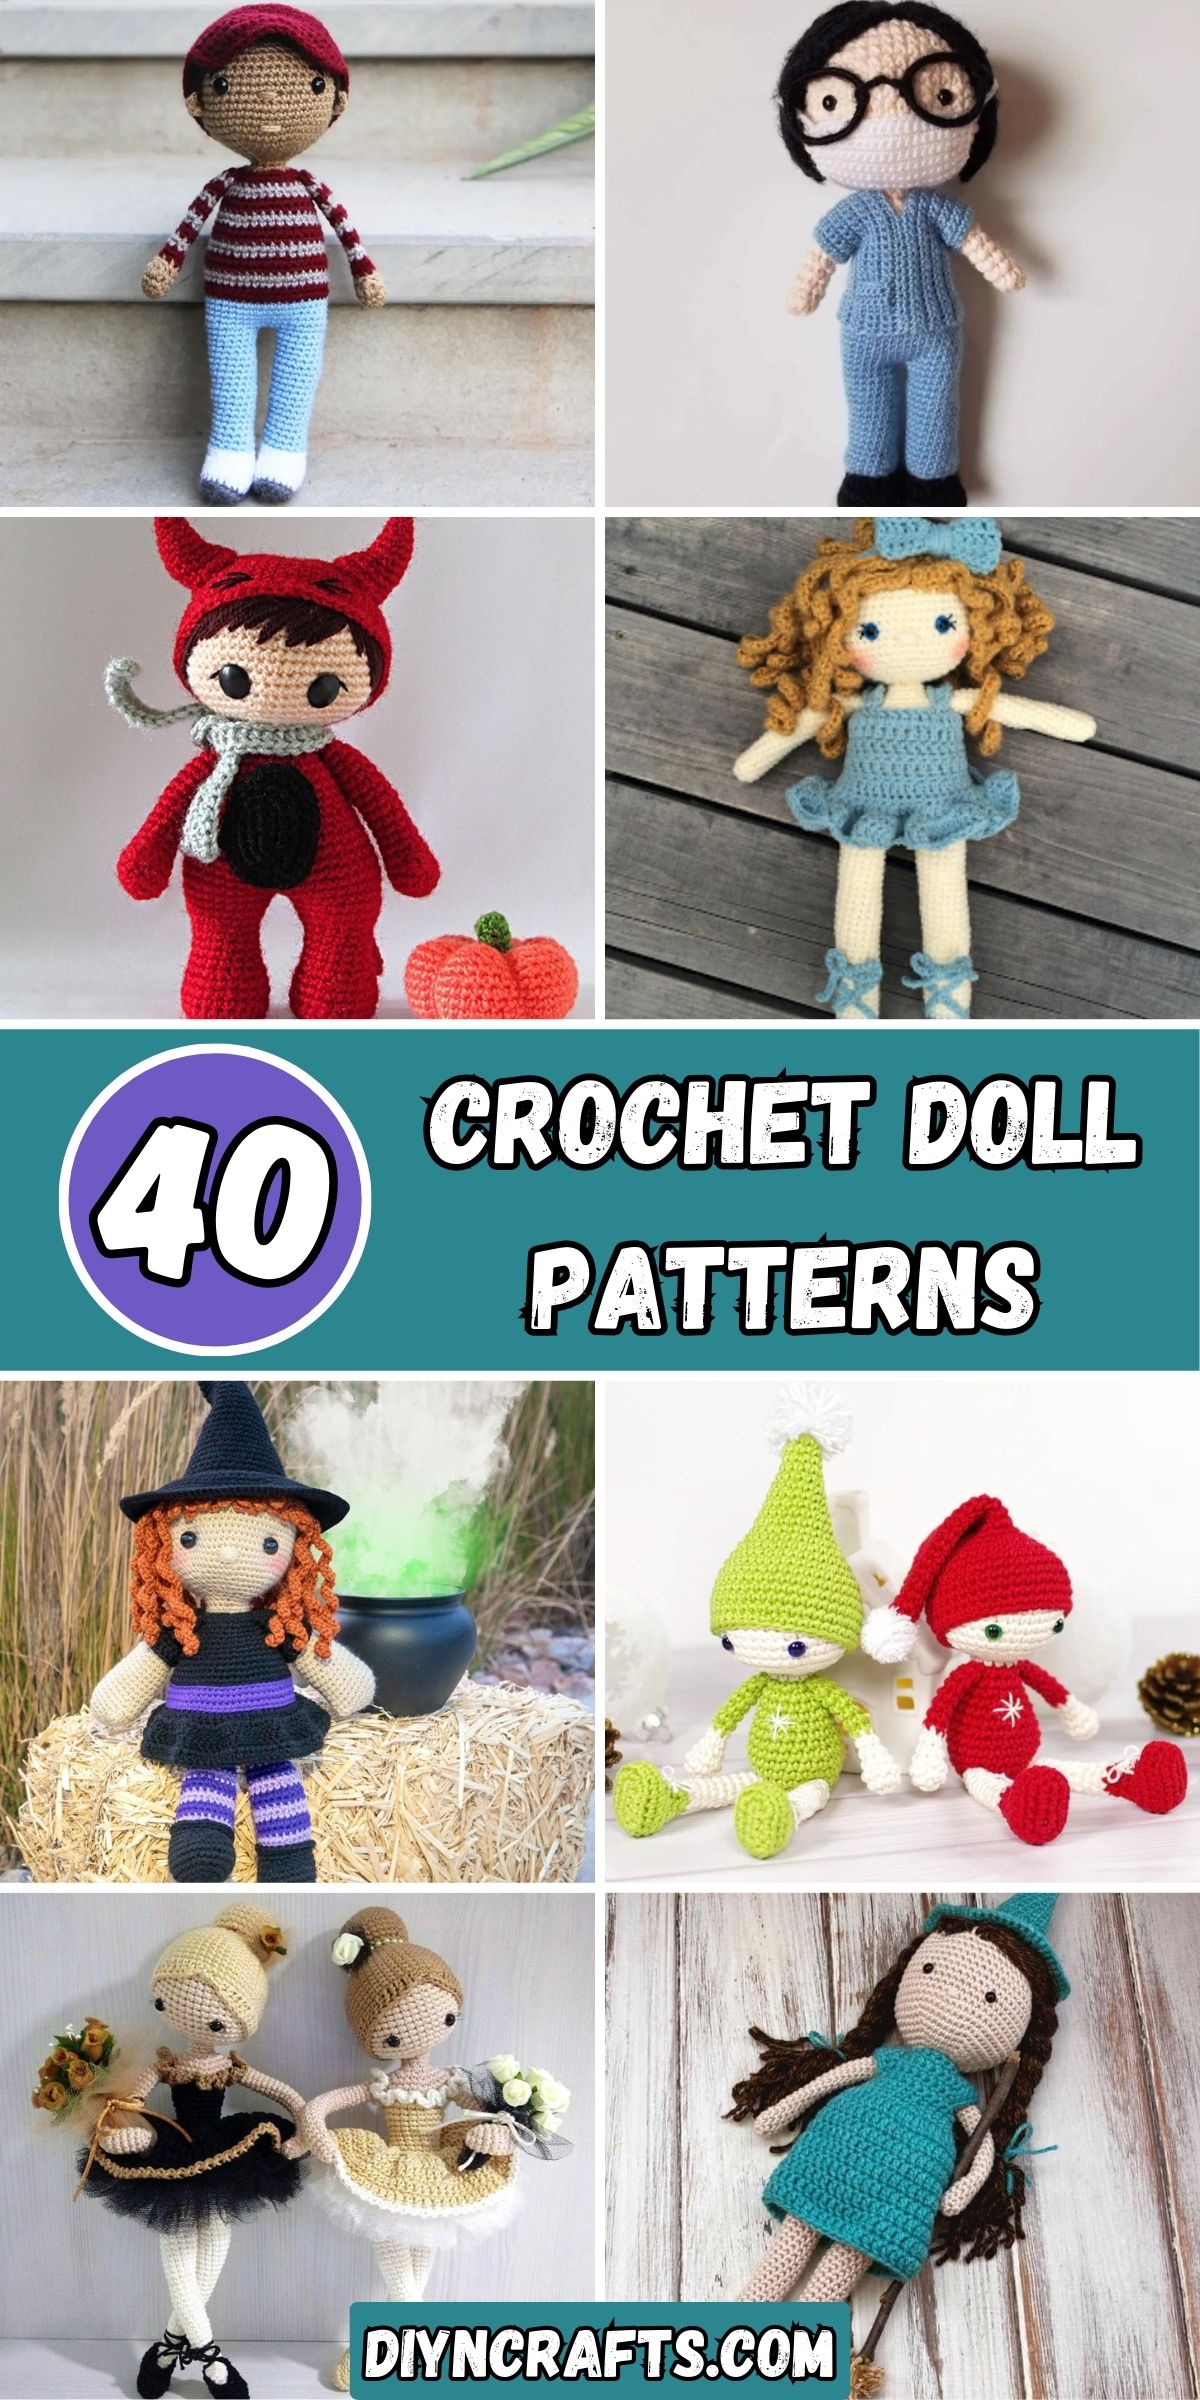 40 Crochet Doll Patterns collage.